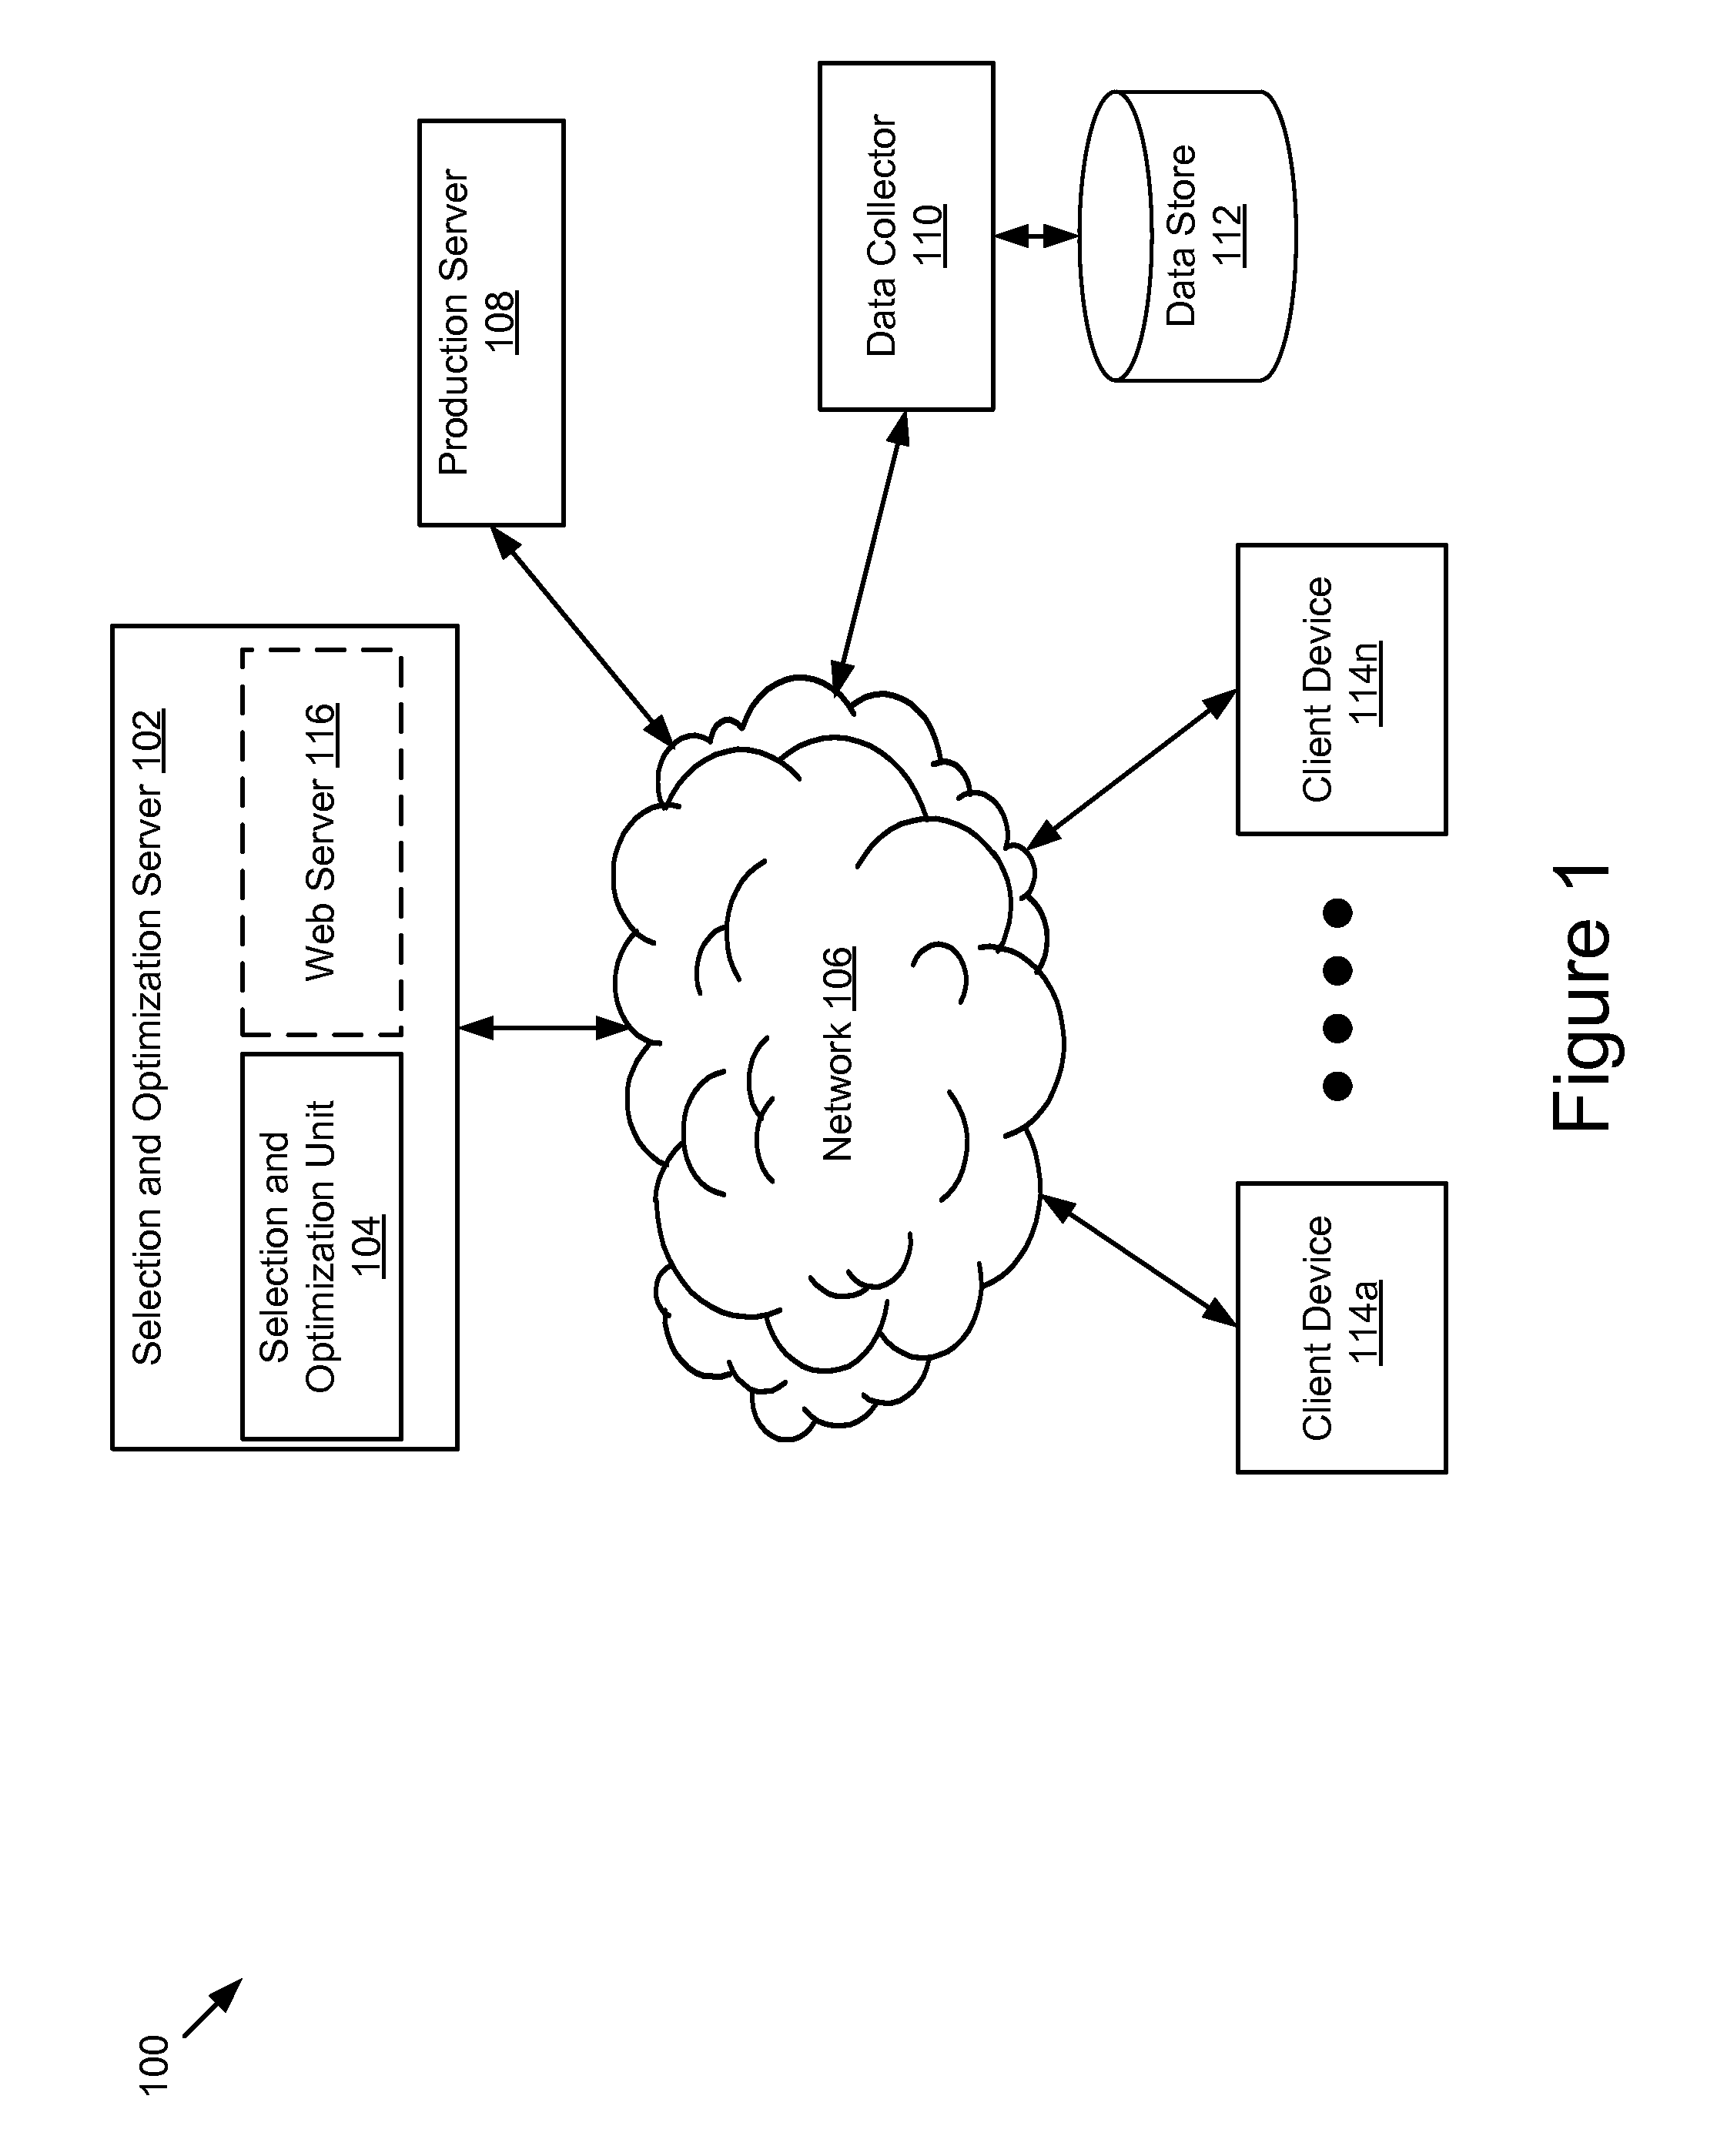 Configurable Machine Learning Method Selection and Parameter Optimization System and Method